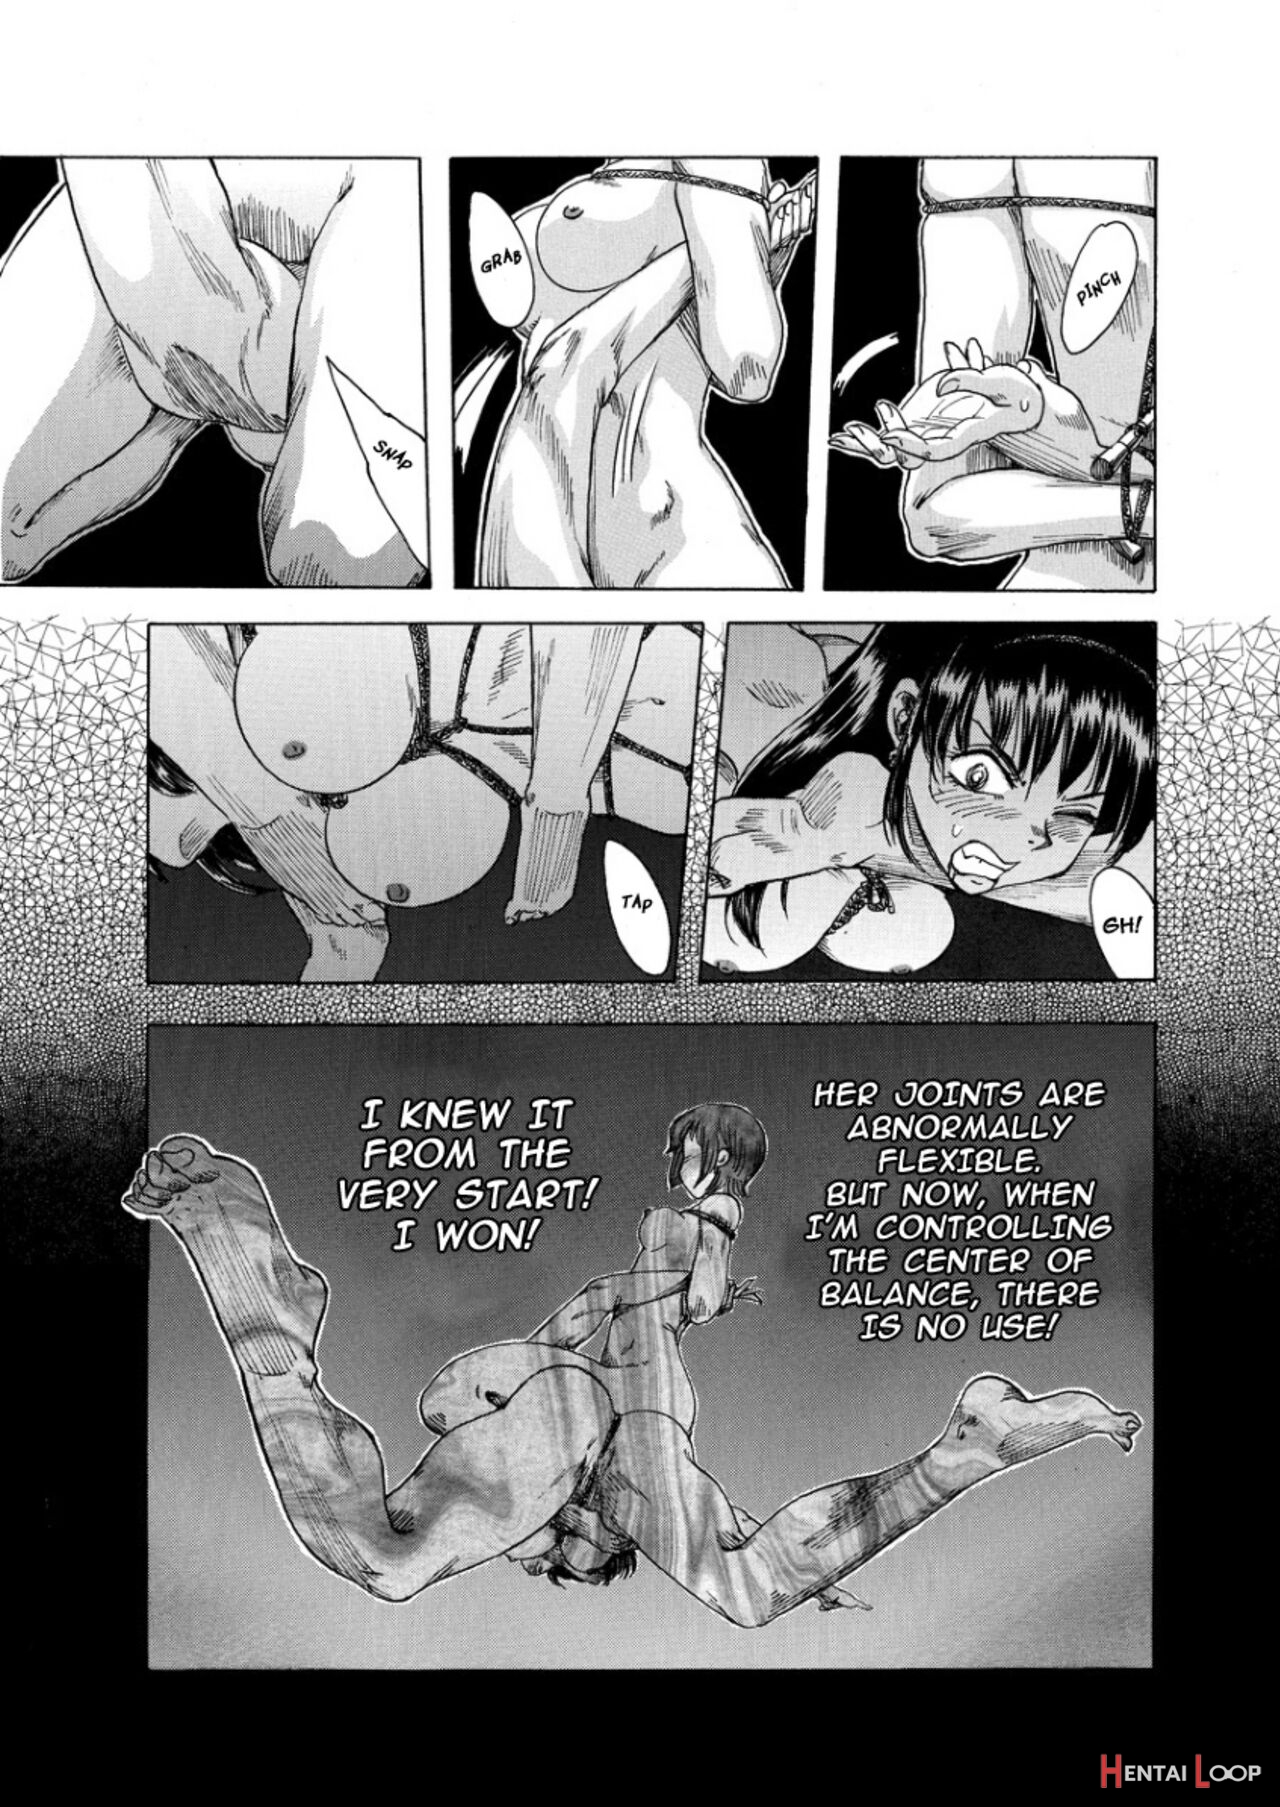 A Tale Of Bondage Fighter Princess Sphinx 3 English page 43